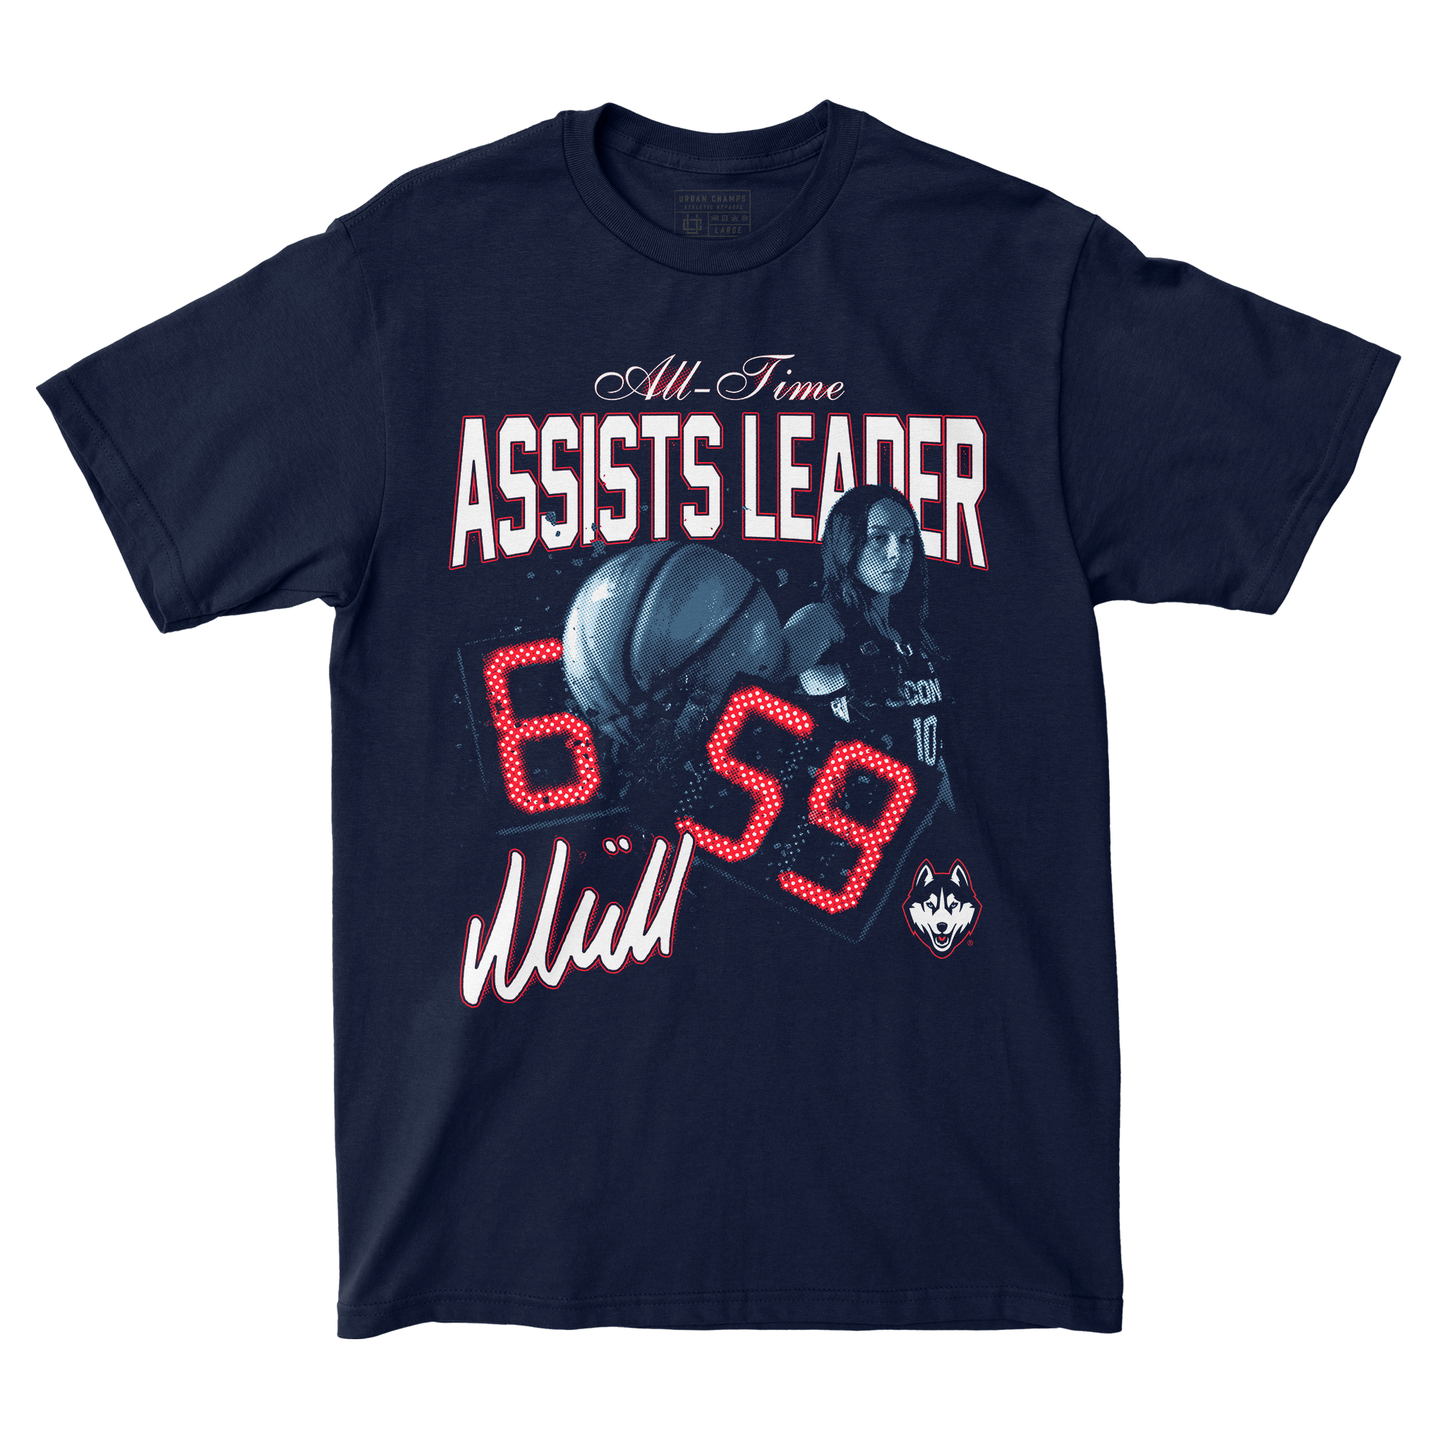 EXCLUSIVE RELEASE: Nika Mühl - All Time Assist Leader Tee